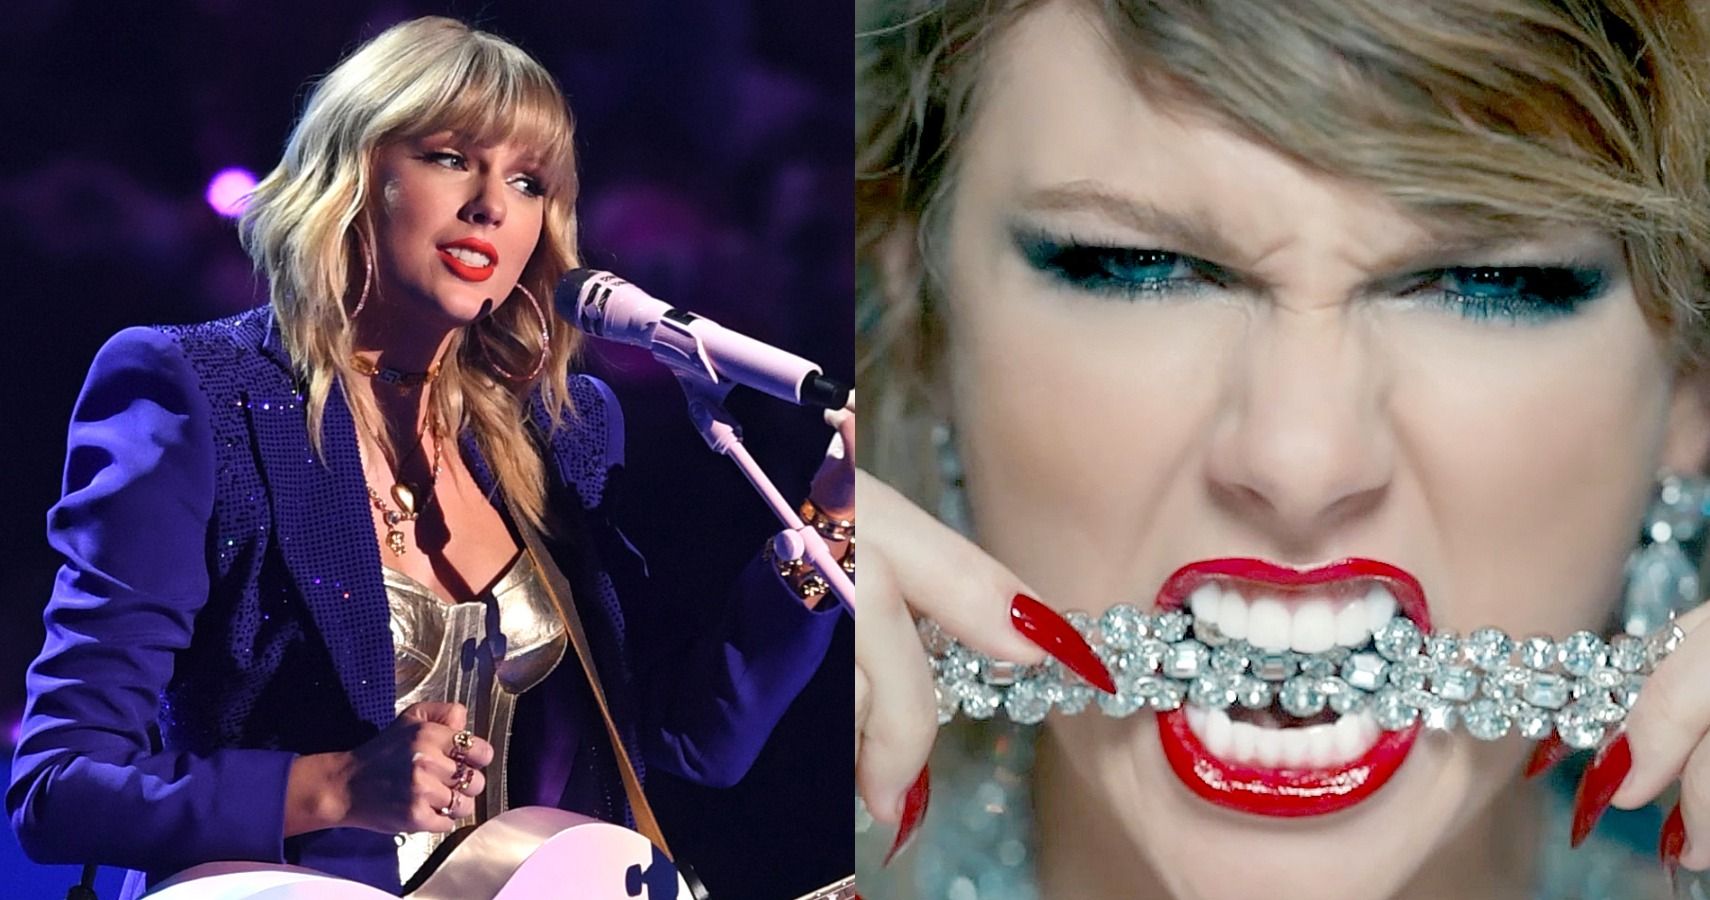 10 Photos From Taylor Swift's Instagram Page We Can All Relate To